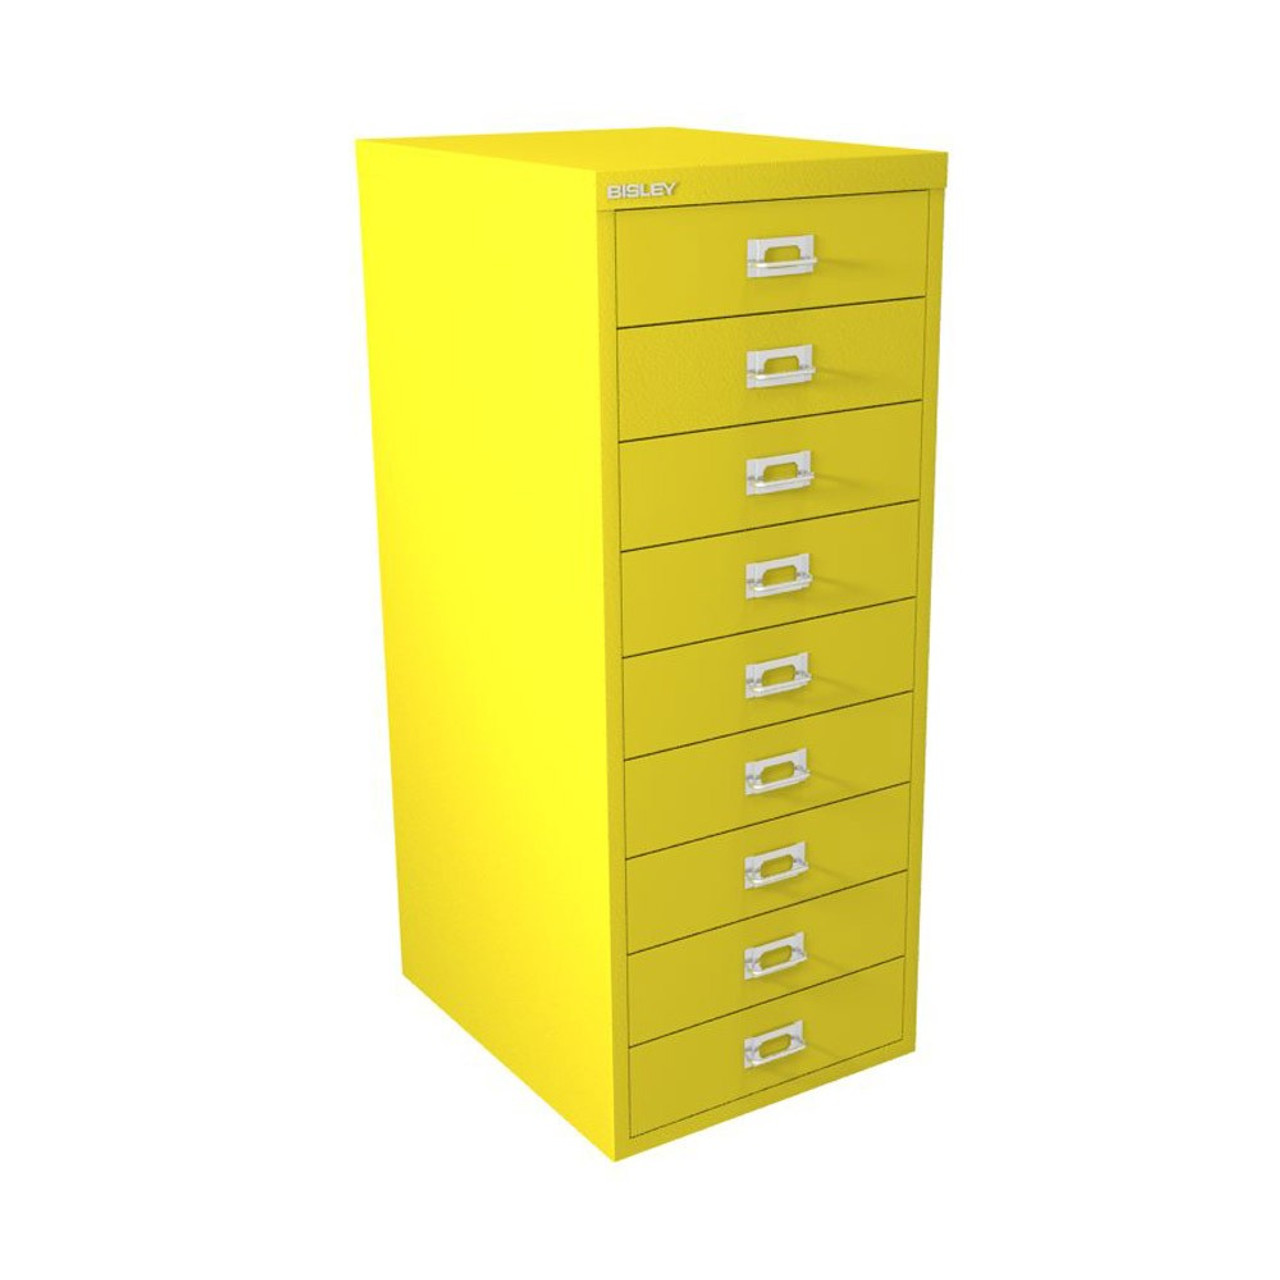 Details about   OFFICE PEDESTAL DRAWERS VERY GOOD CONDITIONS FILING CABINET 